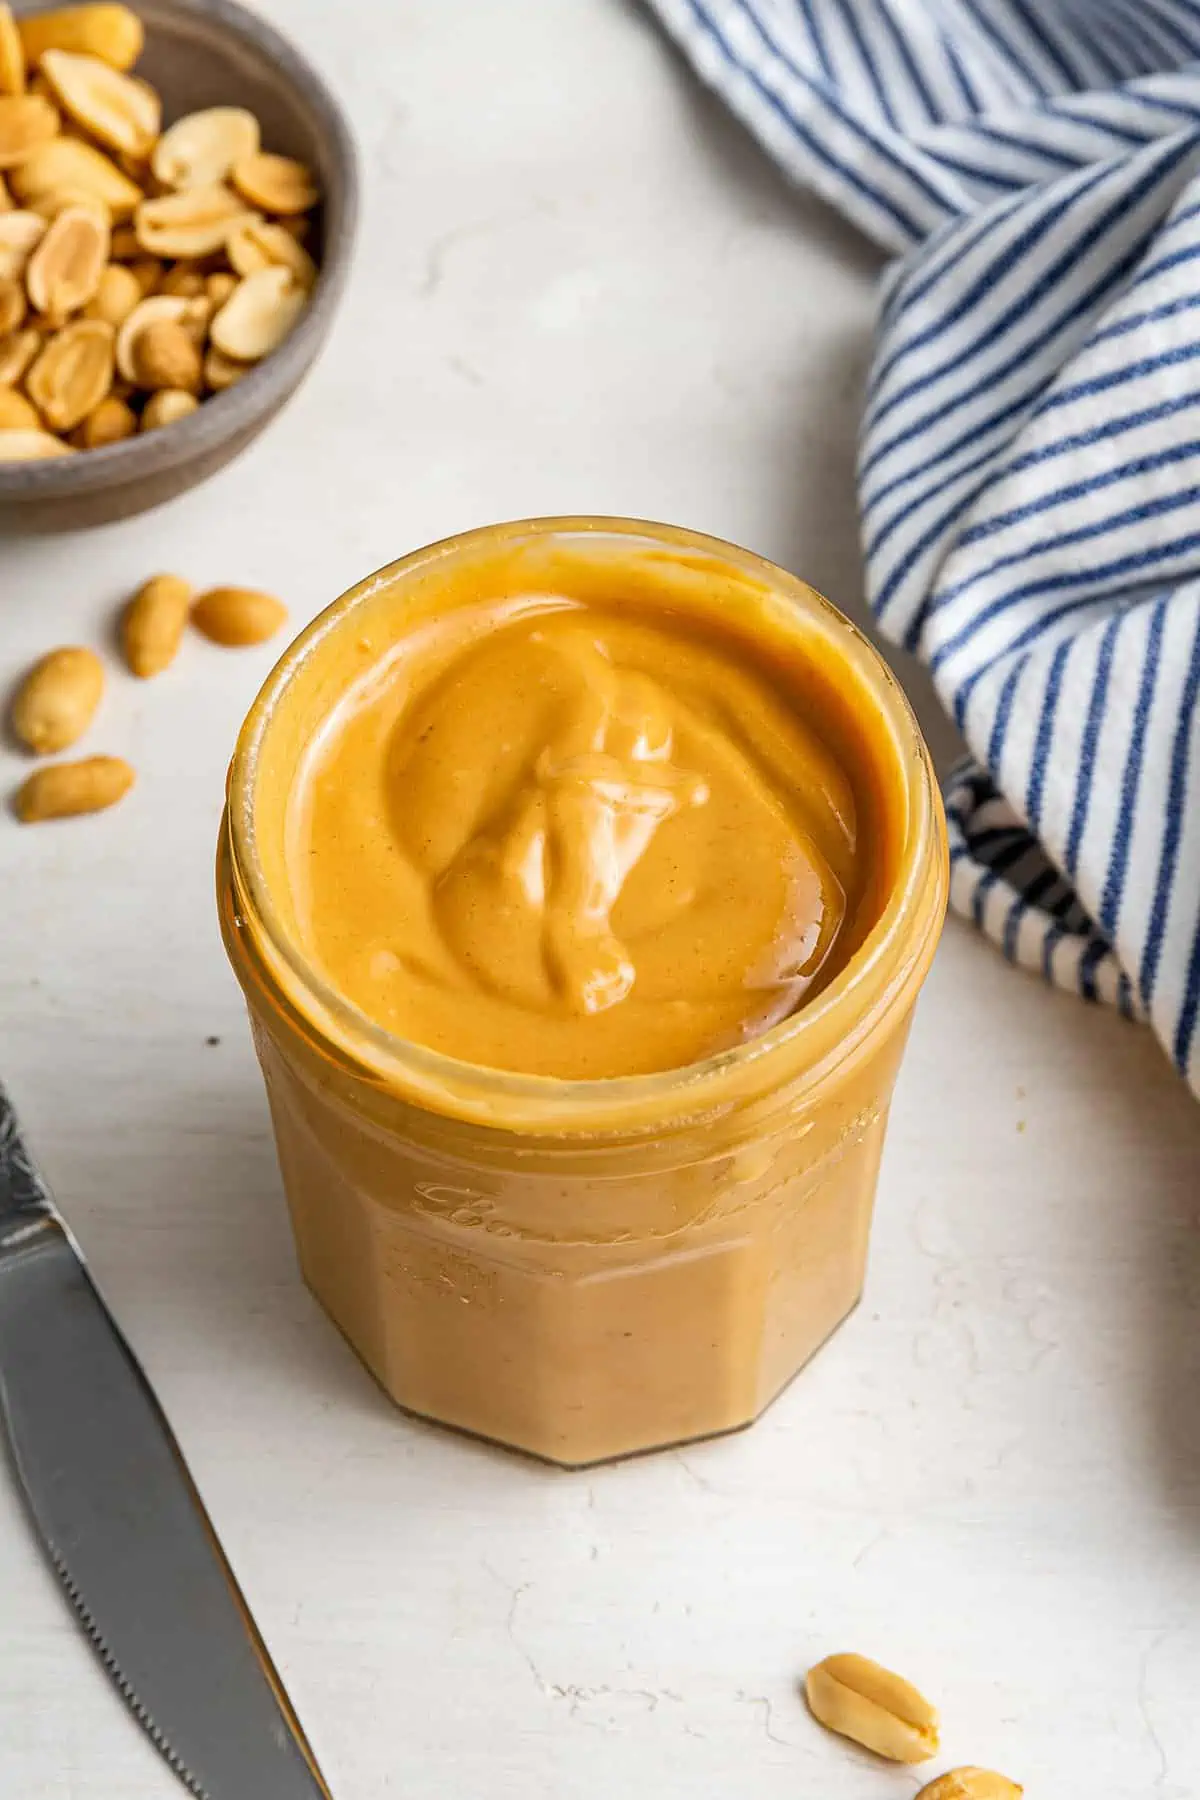 A jar of honey roasted peanut butter, with peanuts and a kitchen towel in the background